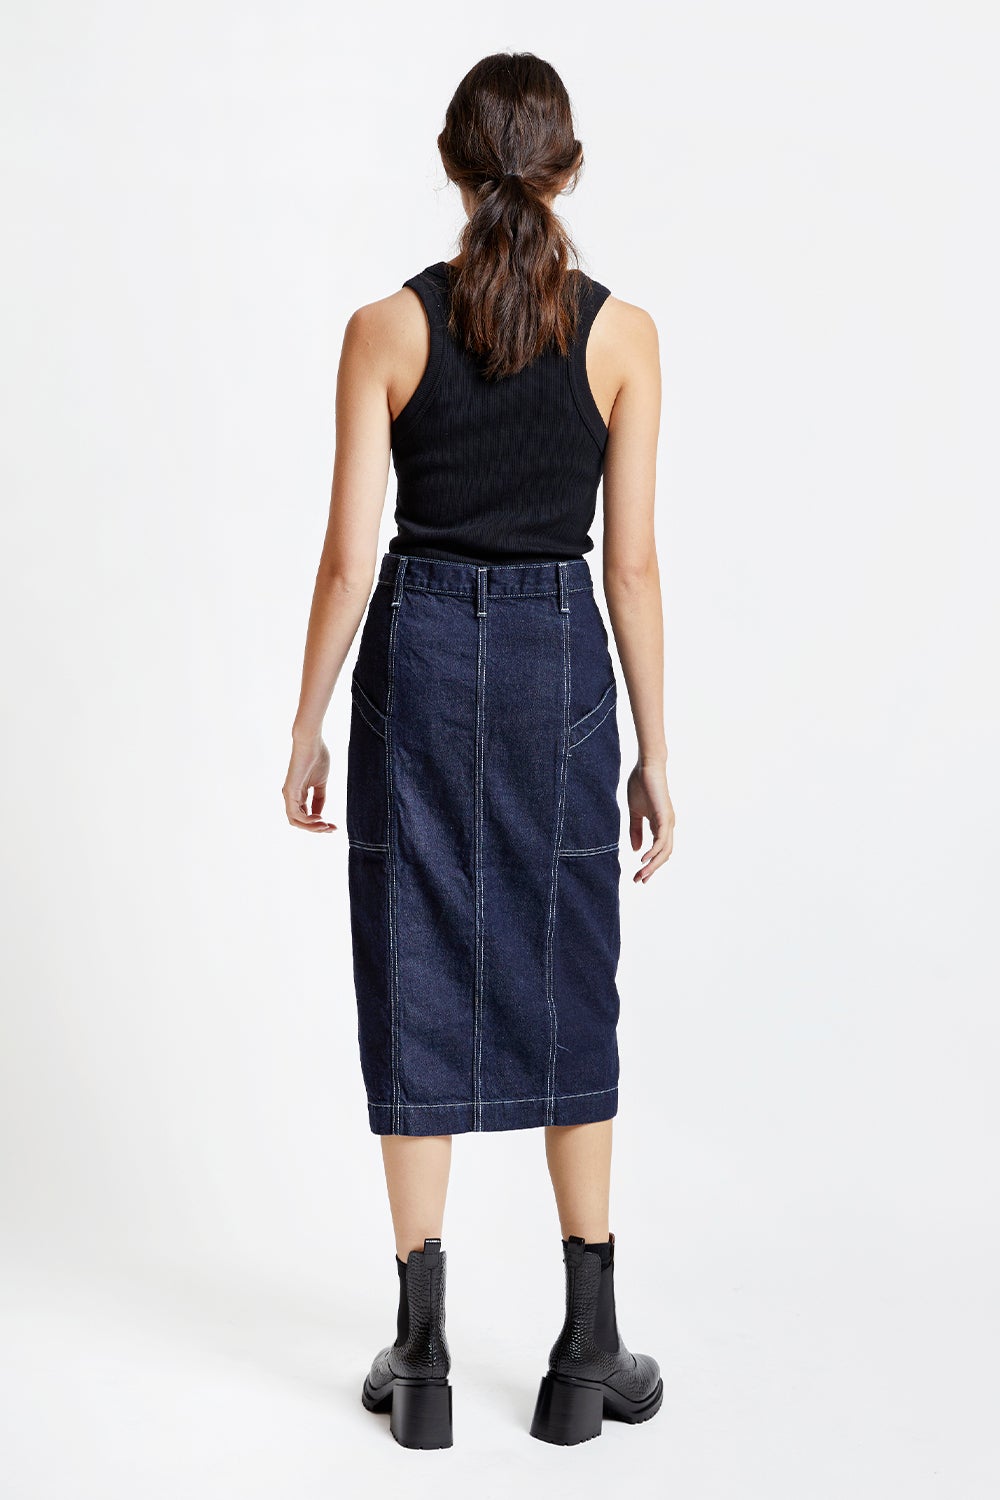 Levi's Made and Crafted Safari Denim Skirt Valley Rinse